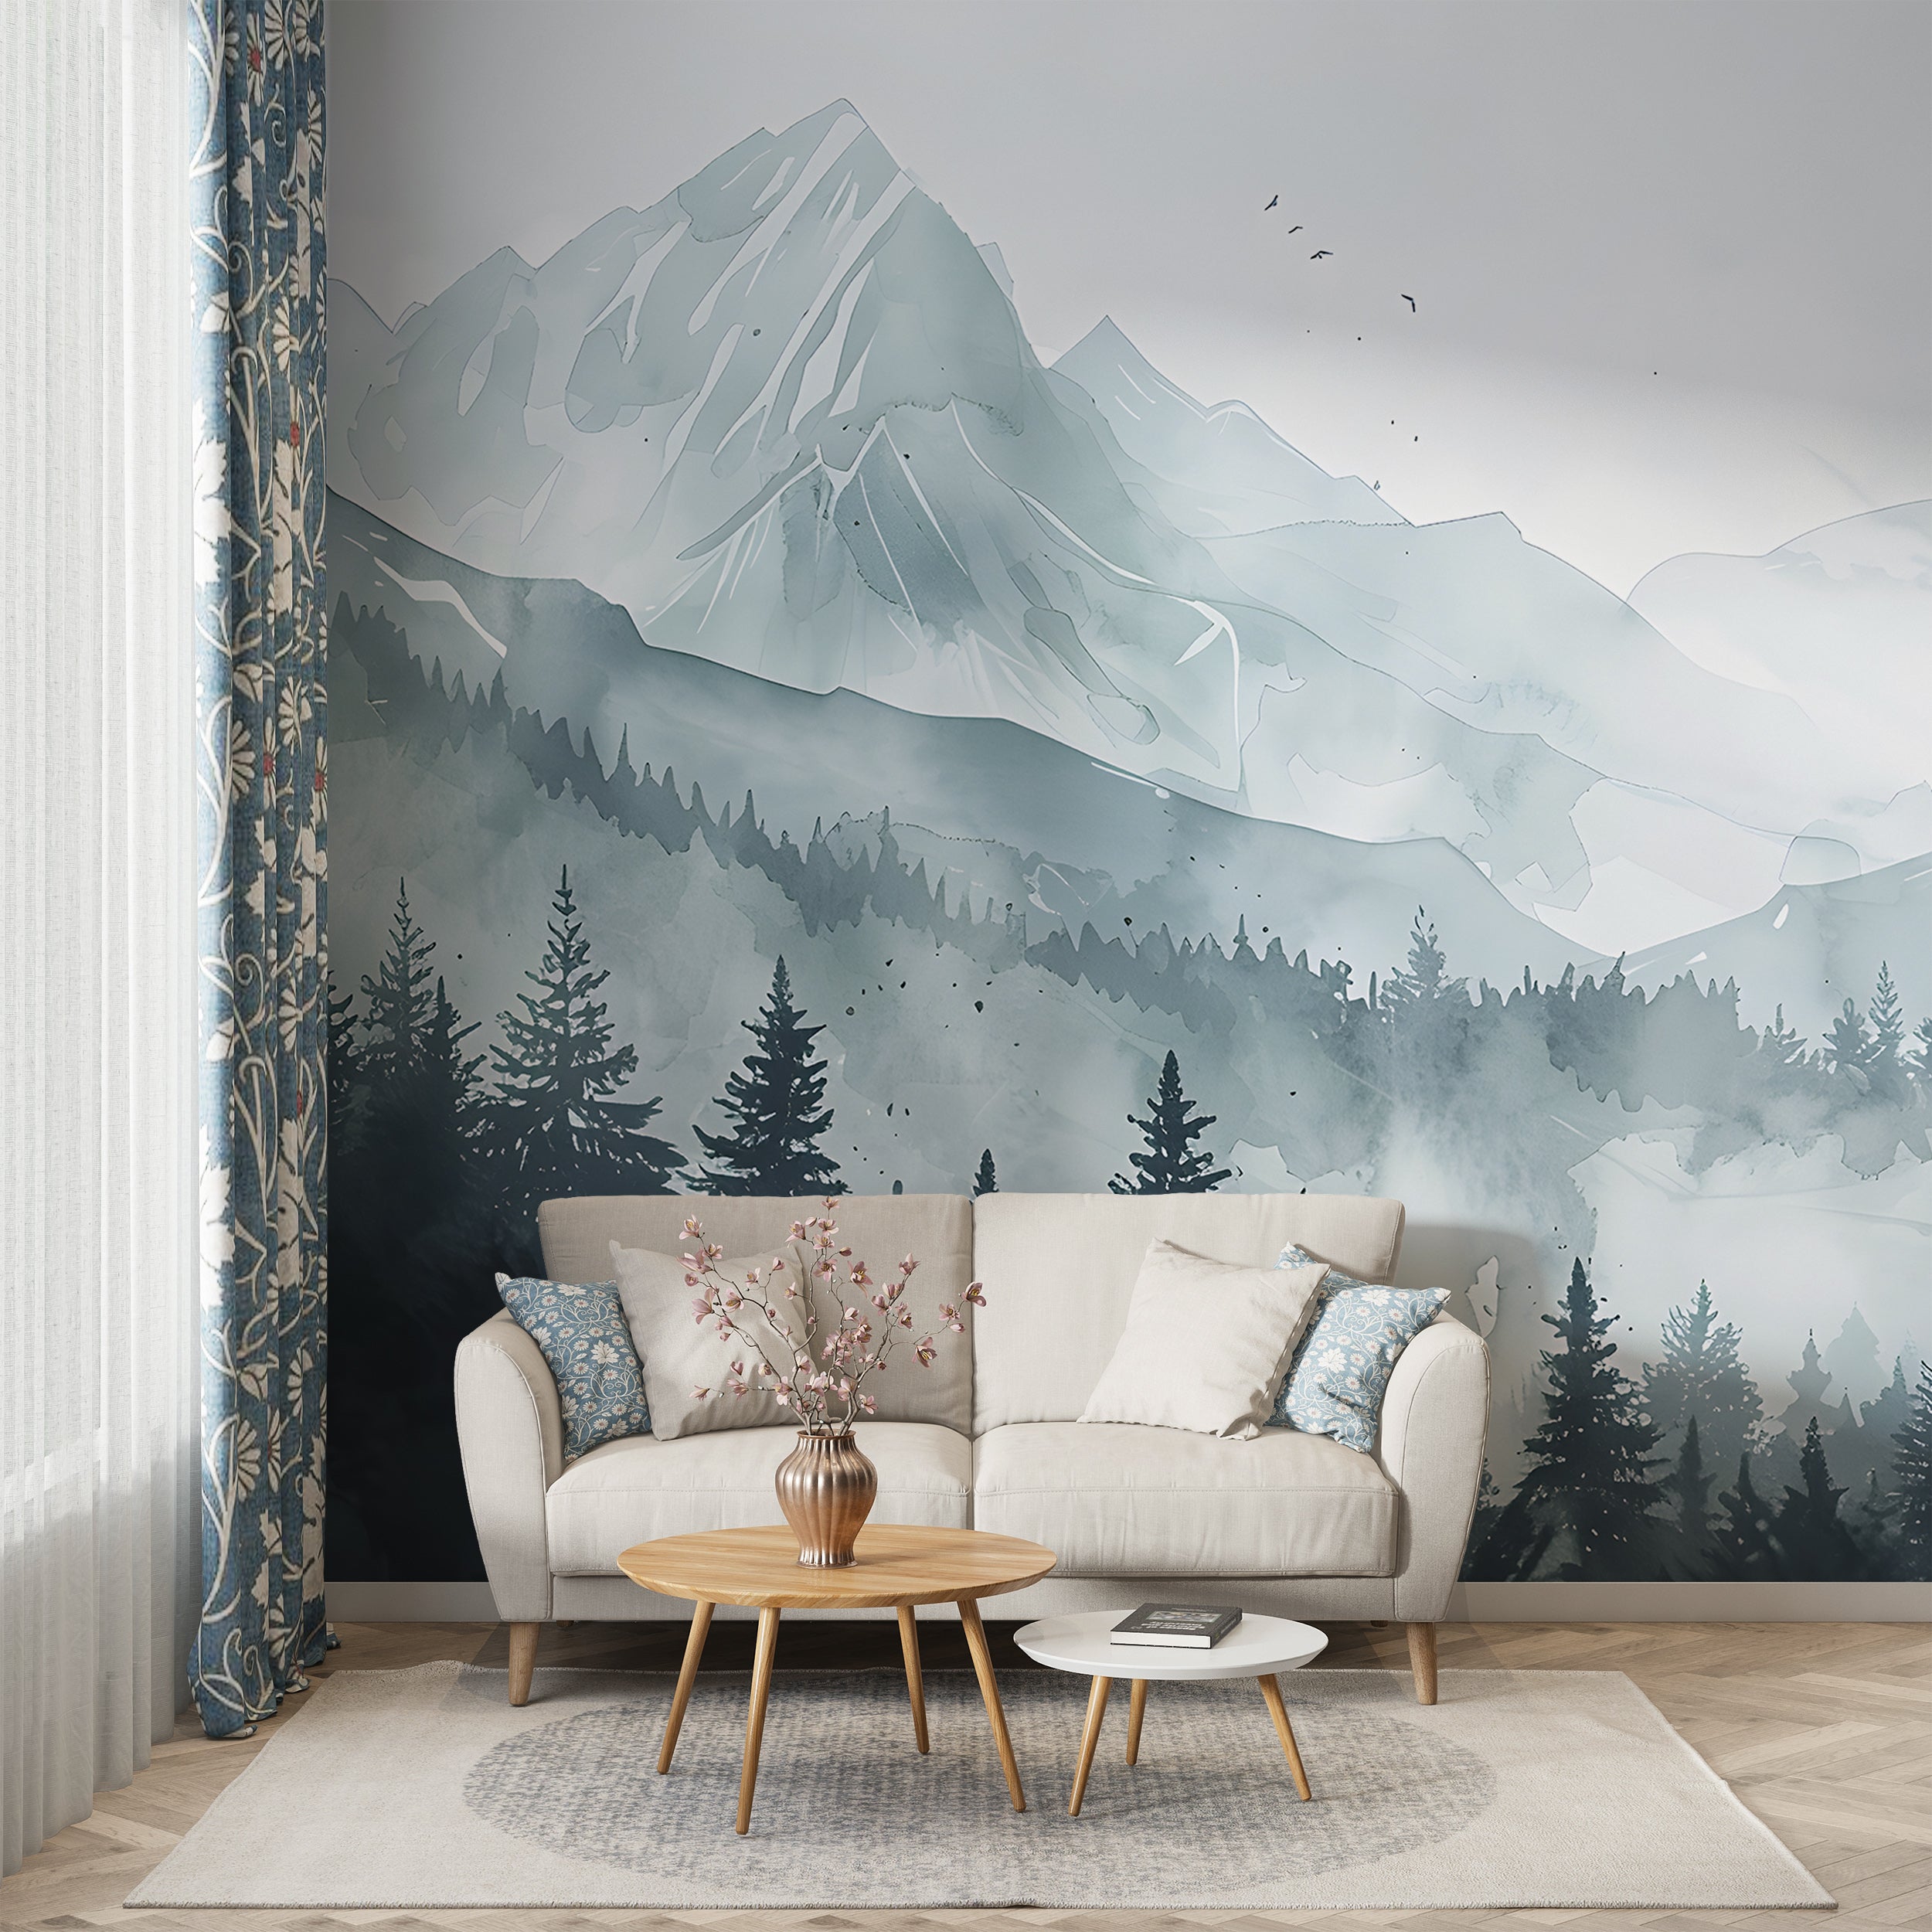 Mountain and Forest Landscape Mural, Watercolor Mountains Wallpaper, Peel and Stick Pine Forest Wall Decal, Nursery Blue Mountain Mural